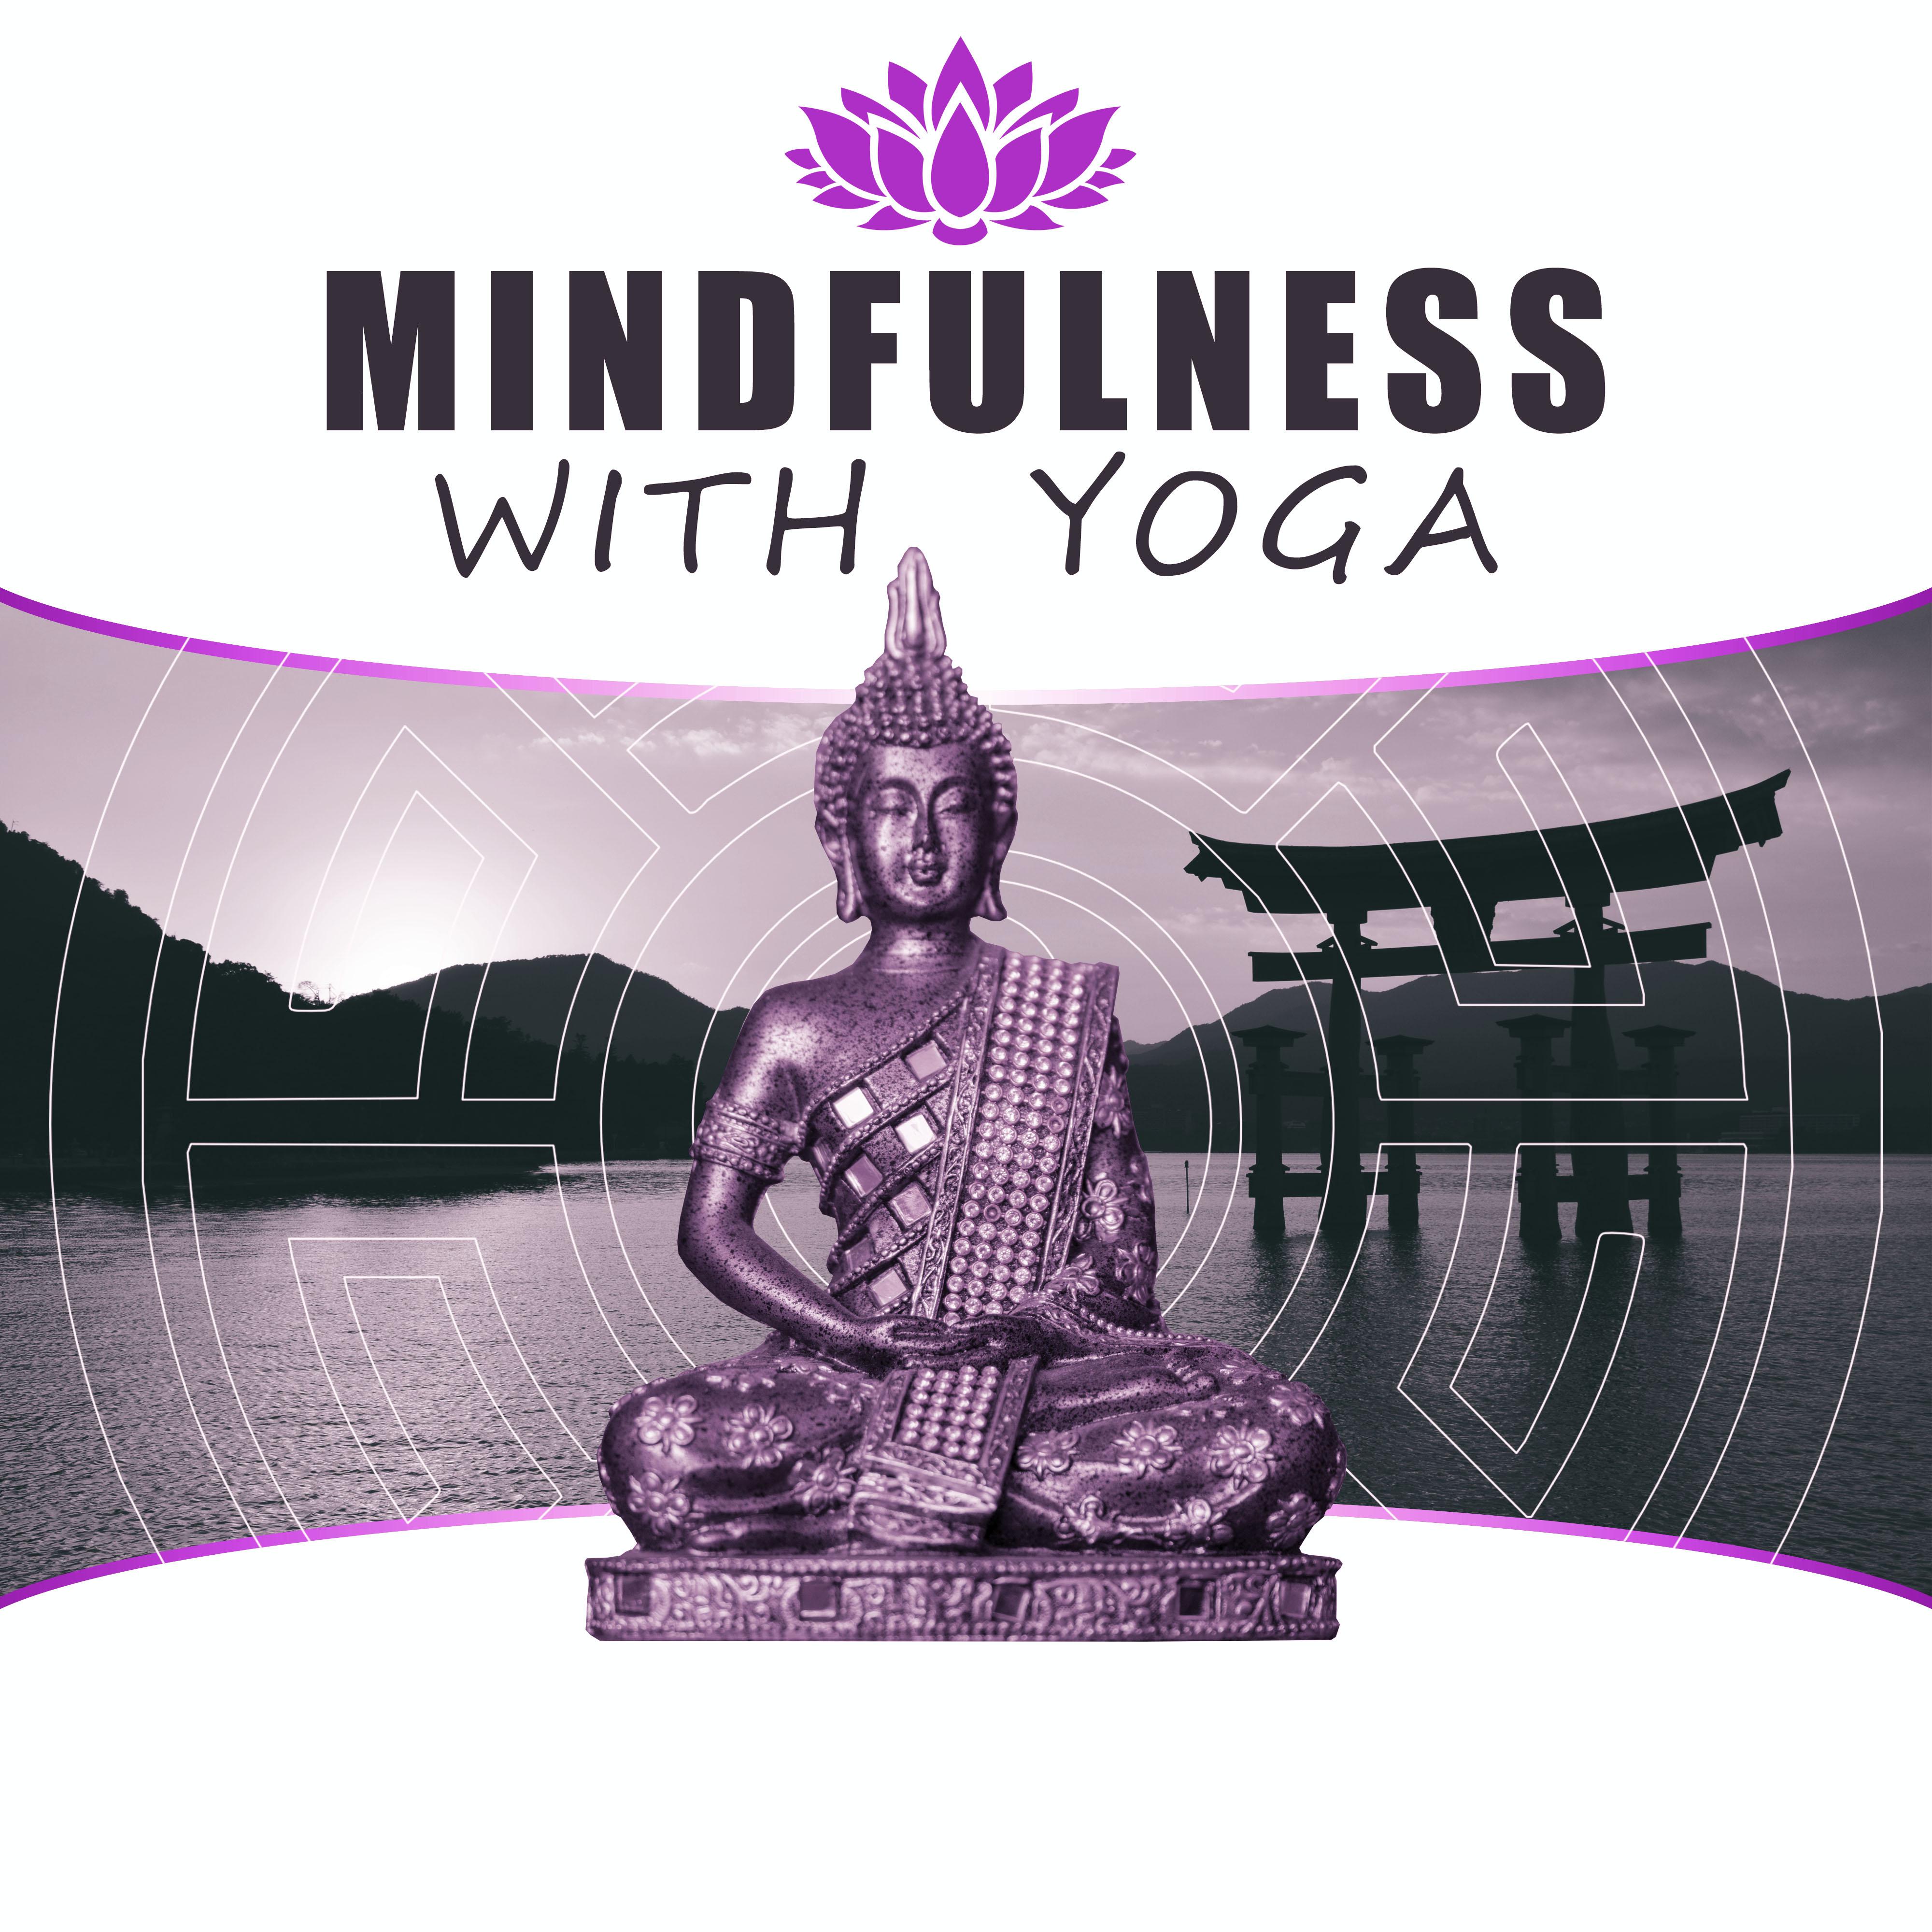 Mindfulness with Yoga  Full of Nature Sounds for Reiki, Yoga Meditation, Improve Inner Peace, Feel Deep Relax Music